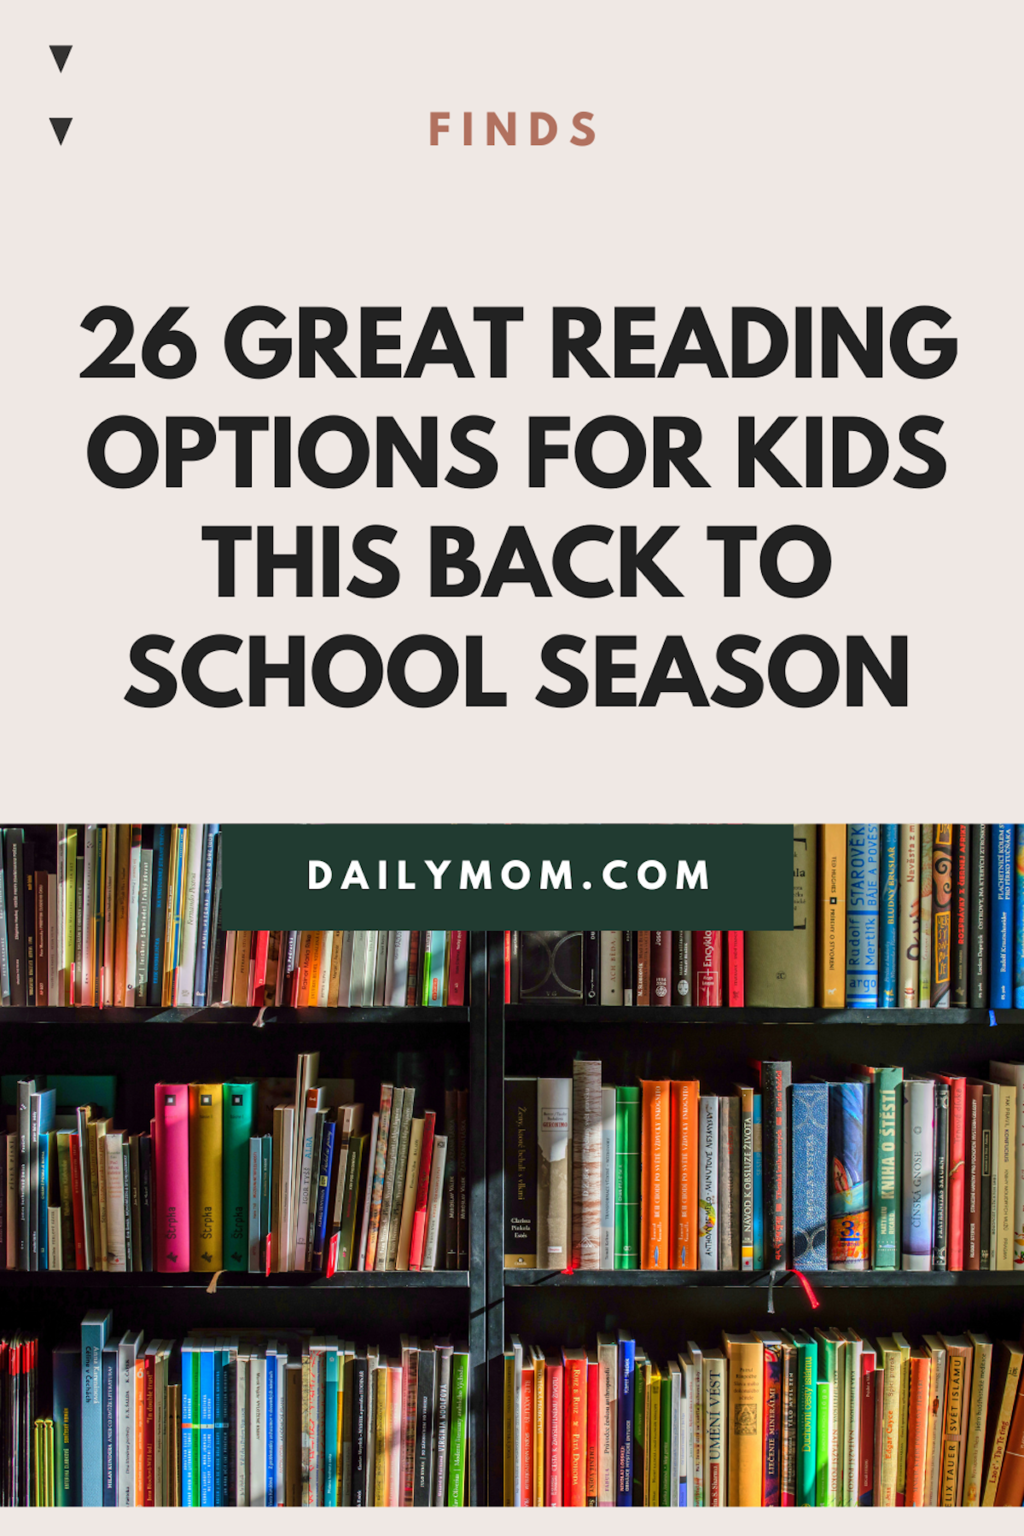 26 Really Great Reading Options For Your Kids This Back-To-School Season